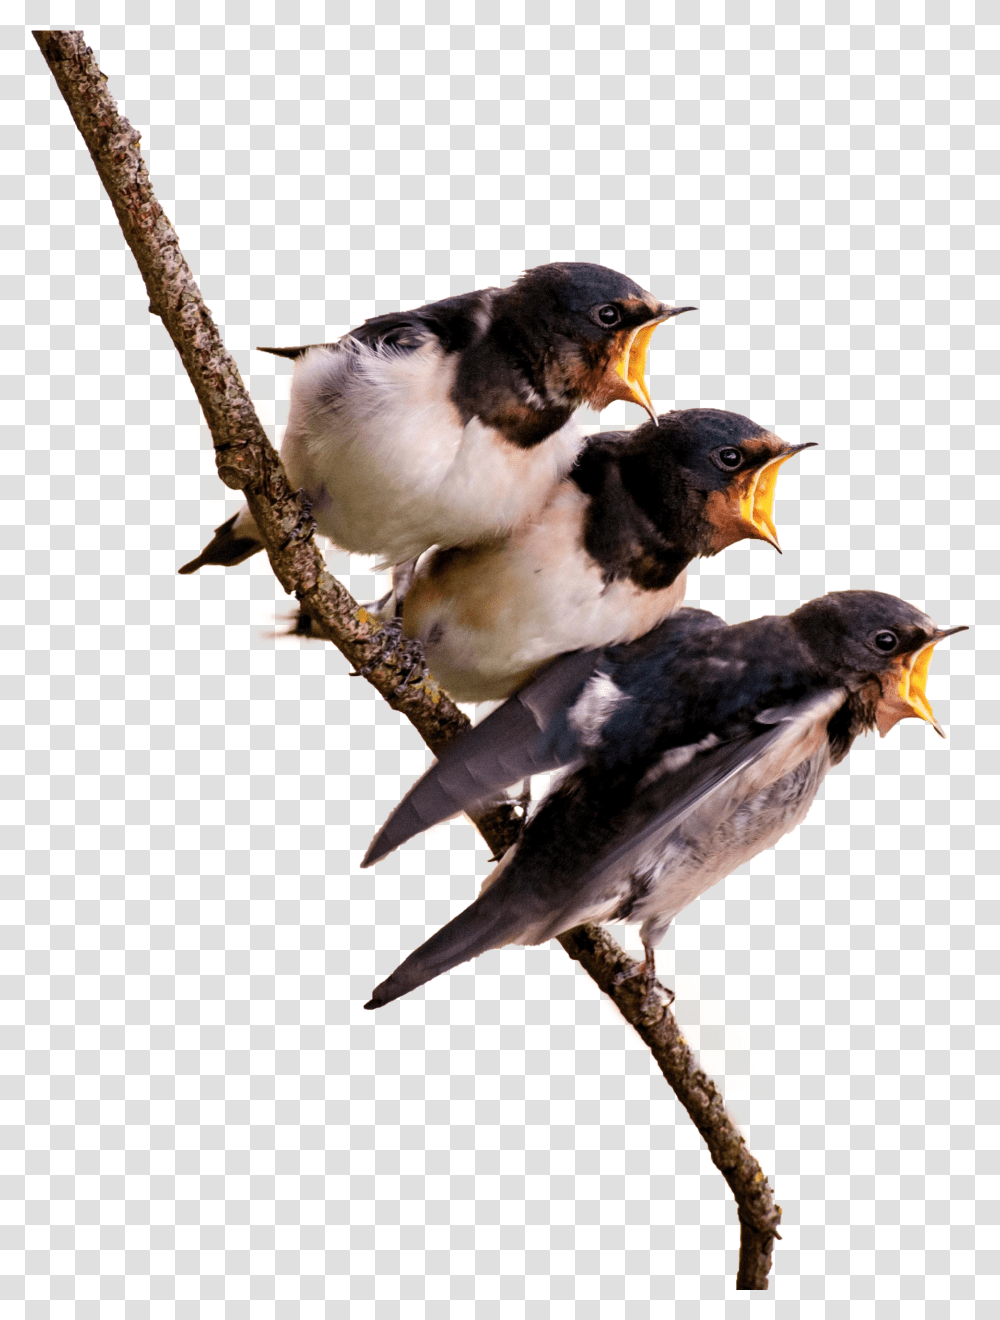 Birds On Branch, Animal, Swallow, Finch, Jay Transparent Png